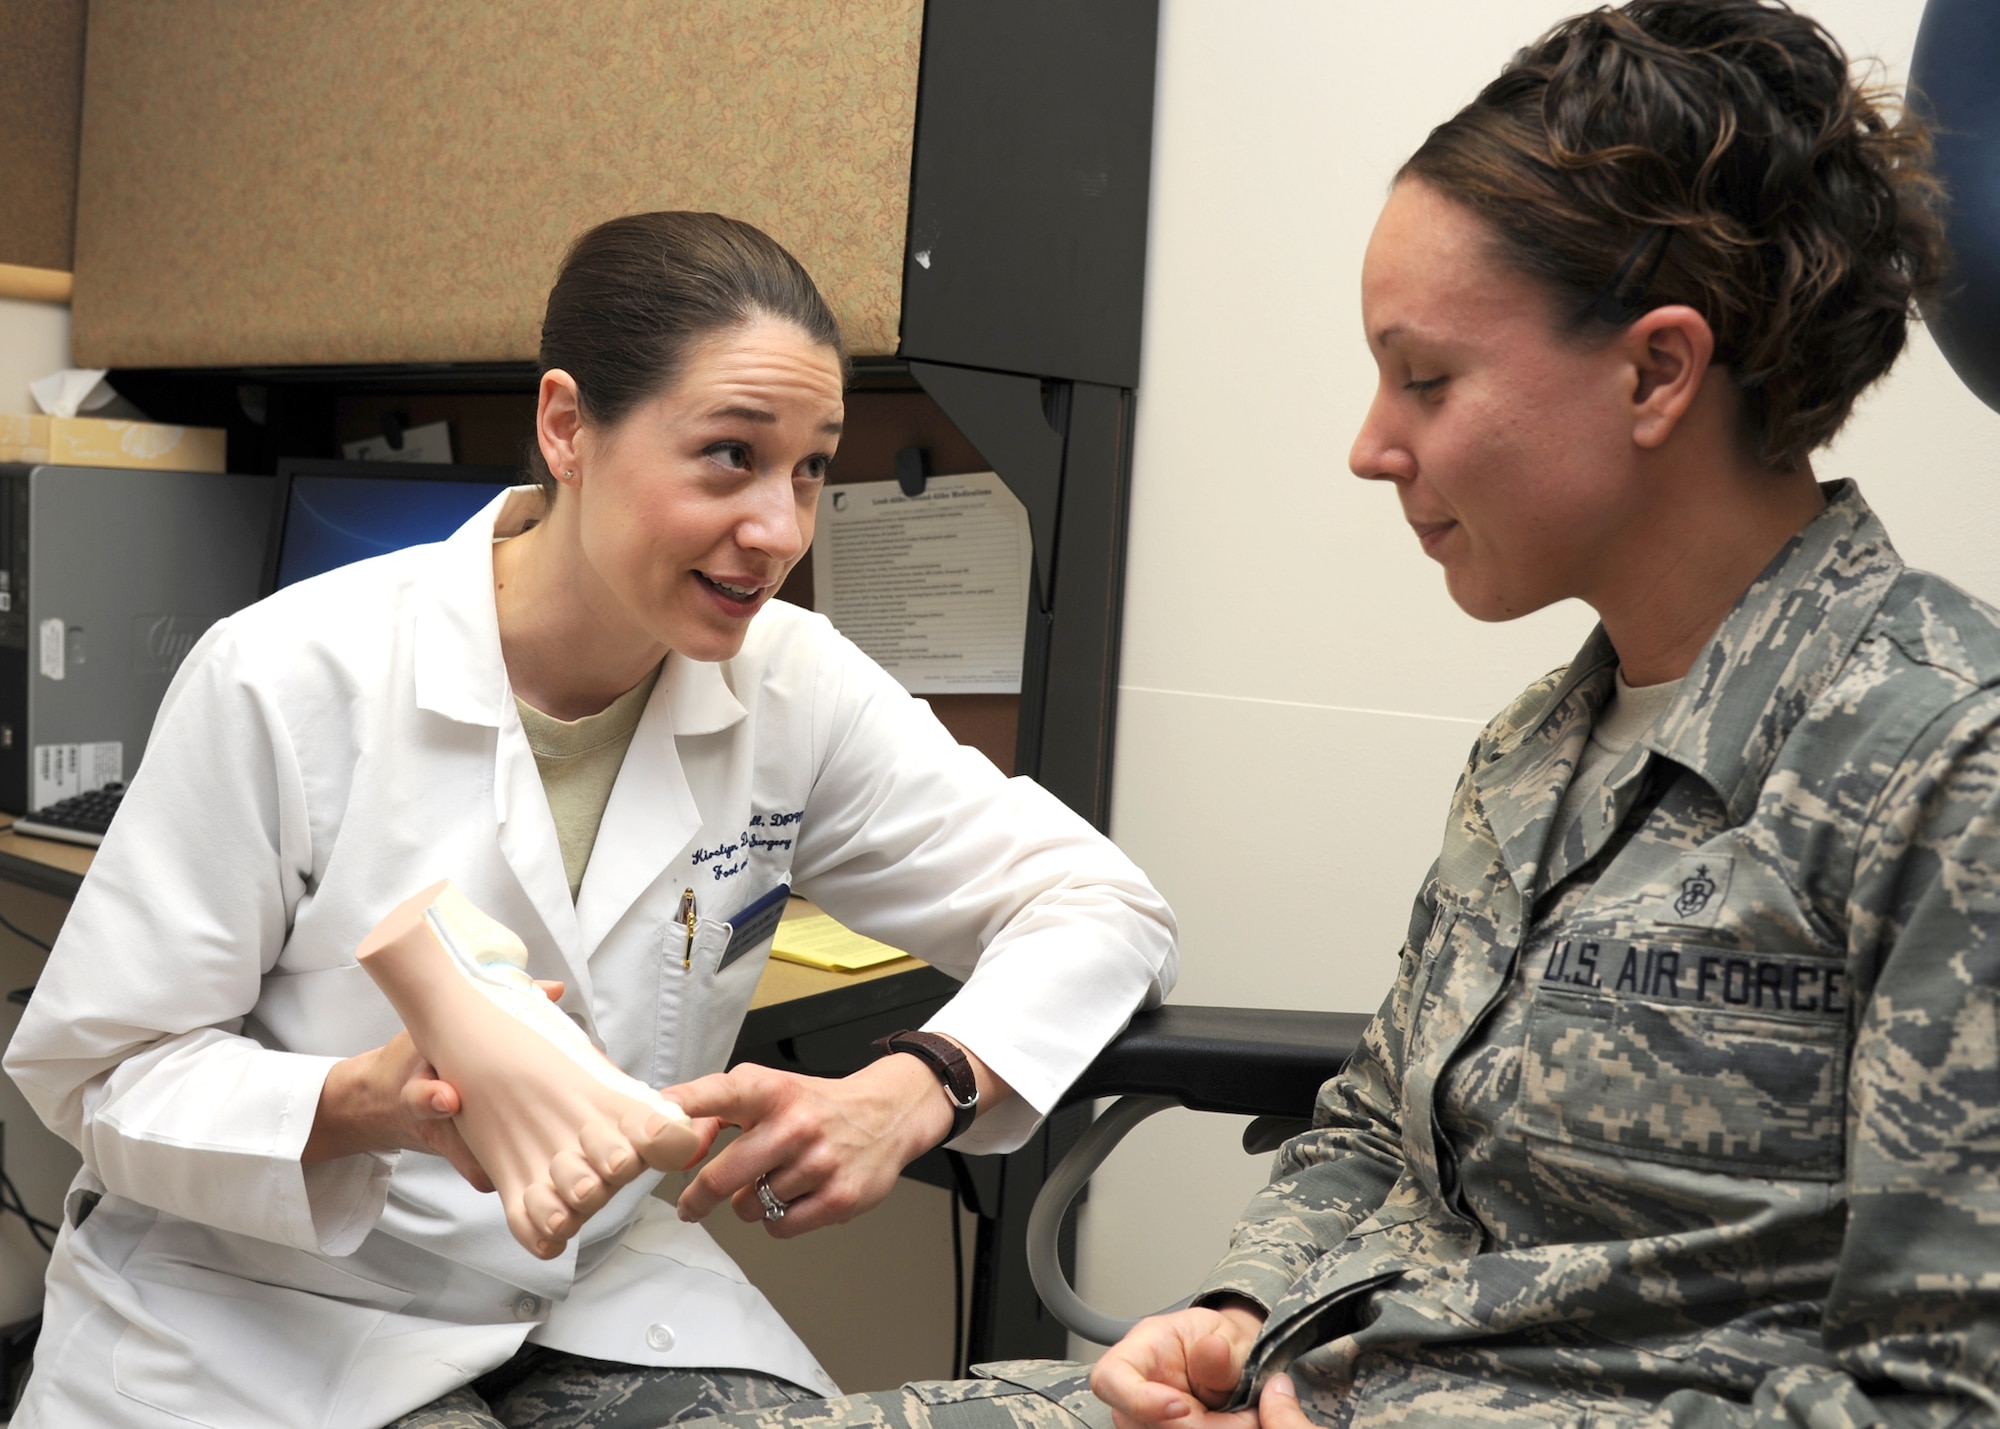 U.S. Air Force Capt. Kirsten Caldwell has a conversation about proper foot care with Staff Sgt. Kelly Yankosky at Wilford Hall Ambulatory Surgical Center, Lackland Air Force Base, Texas, Jan. 23.  Caldwell is a podiatrist and Yankosky is an orthopedic technician, both are assigned to the 59th Medical Operations Group. Podiatrists are a part of the Biomedical Science Corps (BSC) along with 16 other medical career fields. BSC Appreciation week is recognized in the month of March.  (U.S. Air Force photo/Mr. Harold China)